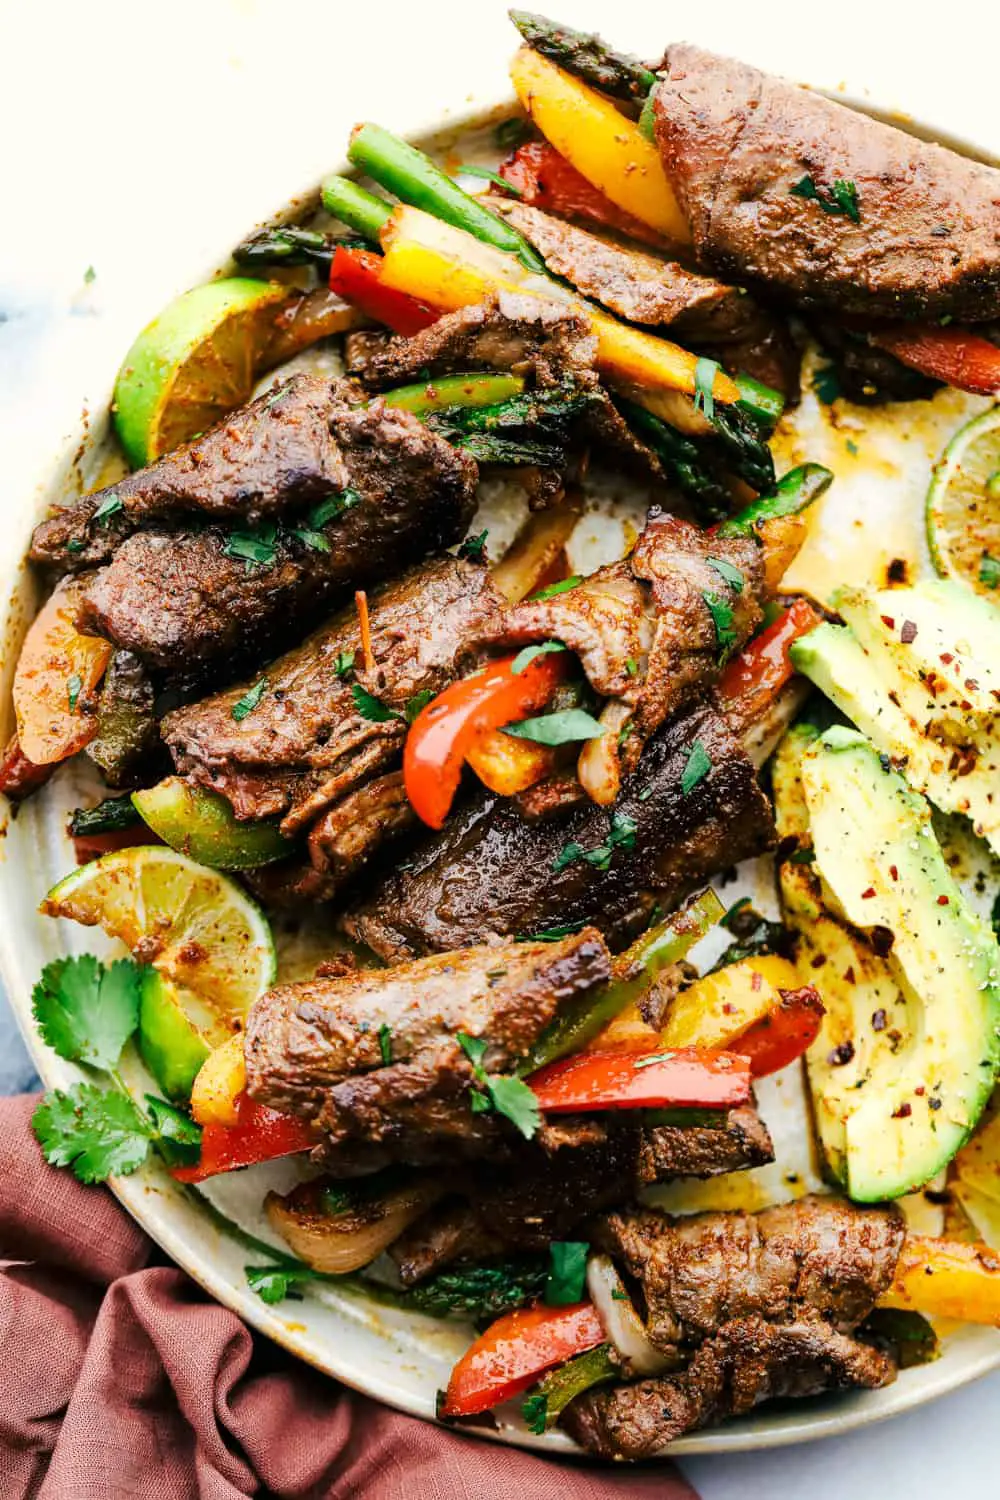 Bell peppers and asparagus wrapped up in flank steak with avocados on a plate. - Steak Fajita Roll Ups